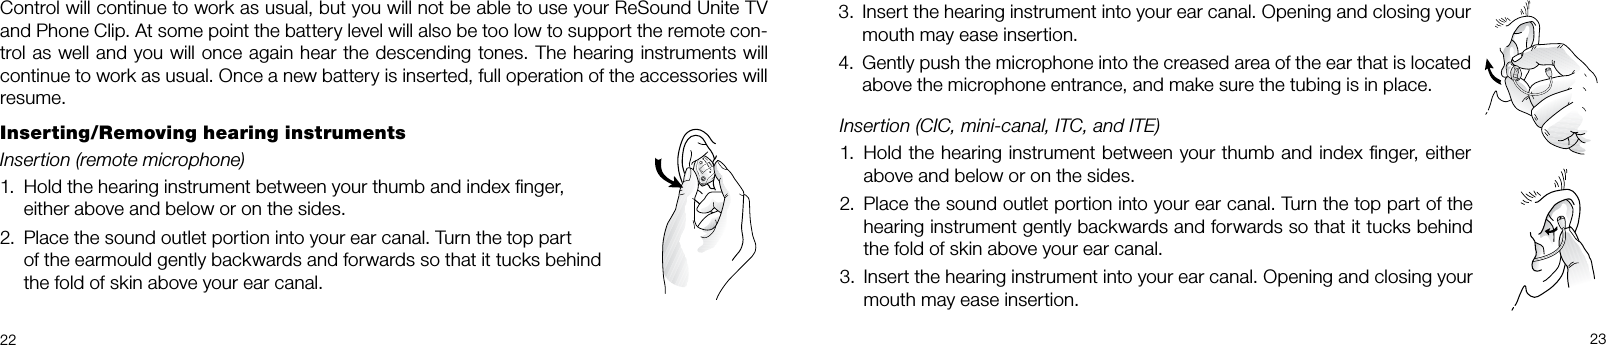 22 233.  Insert the hearing instrument into your ear canal. Opening and closing your mouth may ease insertion.4.  Gently push the microphone into the creased area of the ear that is located above the microphone entrance, and make sure the tubing is in place.Control will continue to work as usual, but you will not be able to use your ReSound Unite TV and Phone Clip. At some point the battery level will also be too low to support the remote con-trol as well and you will once again hear the descending tones. The hearing instruments will continue to work as usual. Once a new battery is inserted, full operation of the accessories will resume.Inserting/Removing hearing instrumentsInsertion (remote microphone) 1.  Hold the hearing instrument between your thumb and index ﬁnger,  either above and below or on the sides.2.  Place the sound outlet portion into your ear canal. Turn the top part    of the earmould gently backwards and forwards so that it tucks behind  the fold of skin above your ear canal.Insertion (CIC, mini-canal, ITC, and ITE)1.  Hold the hearing instrument between your thumb and index ﬁnger, either above and below or on the sides.2.  Place the sound outlet portion into your ear canal. Turn the top part of the hearing instrument gently backwards and forwards so that it tucks behind the fold of skin above your ear canal.3.  Insert the hearing instrument into your ear canal. Opening and closing your mouth may ease insertion. 